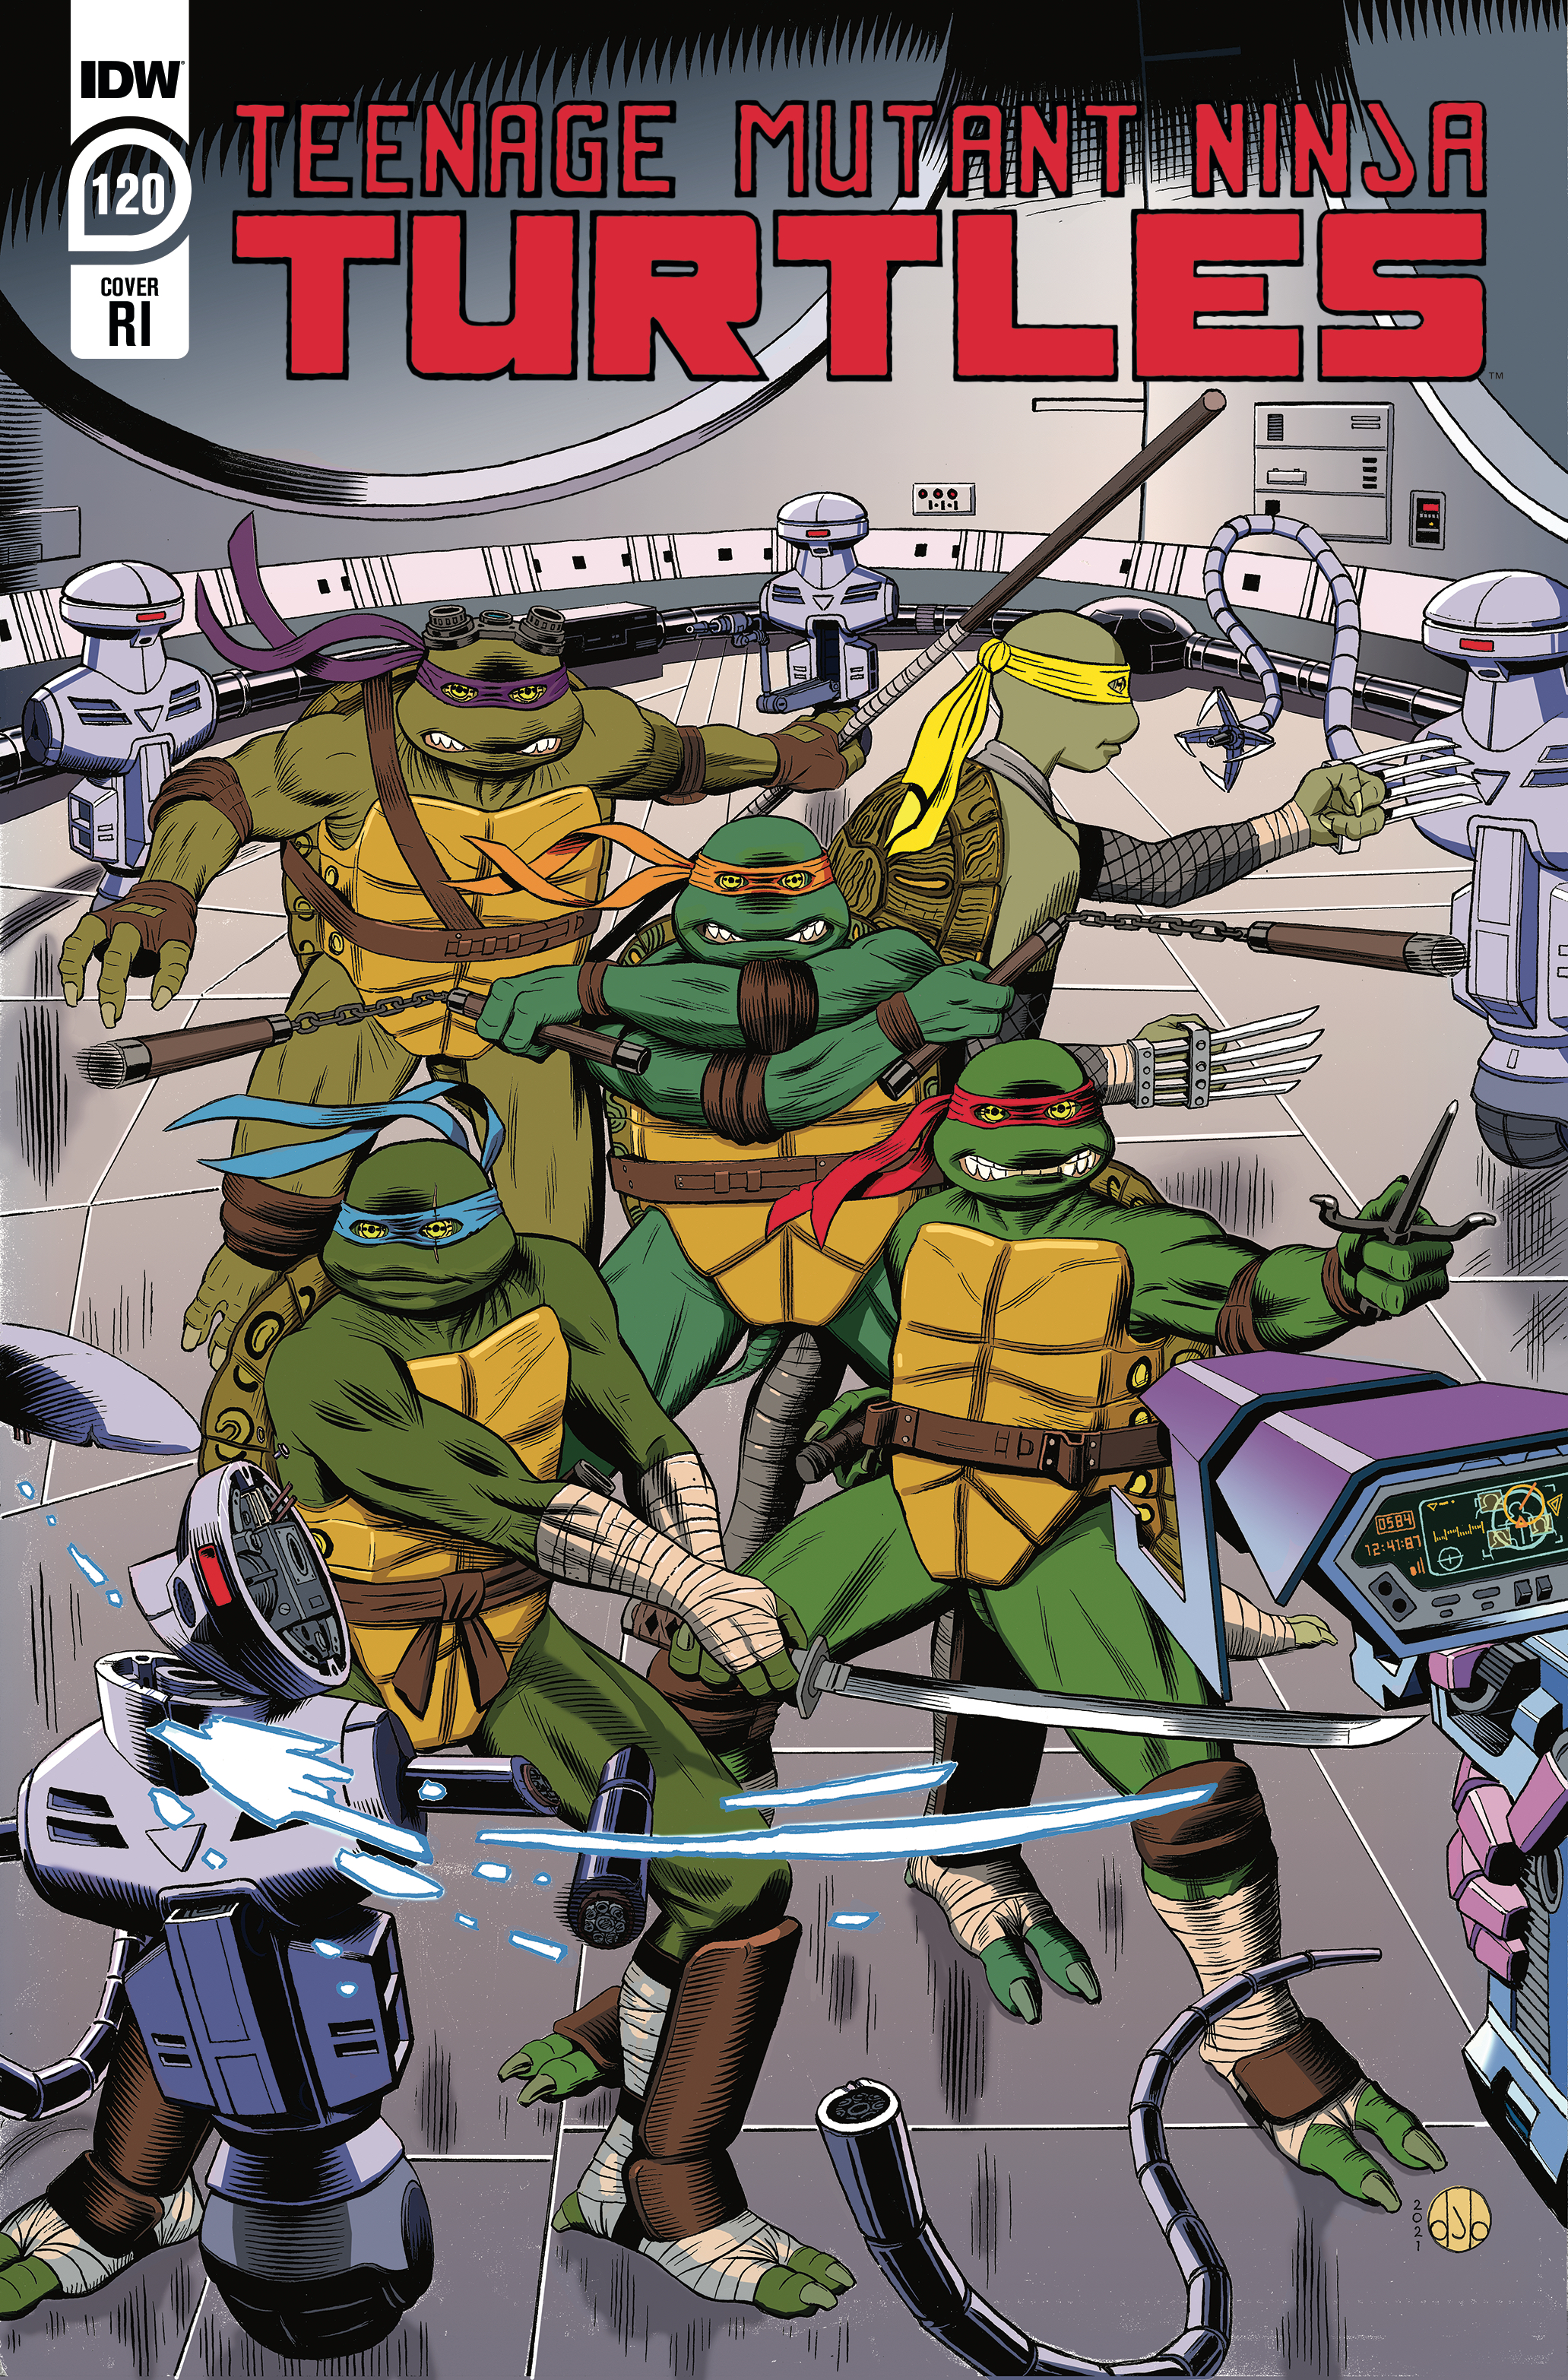 Teenage Mutant Ninja Turtles Ongoing #120 Cover C 1 for 10 Incentive Bryant (2011)